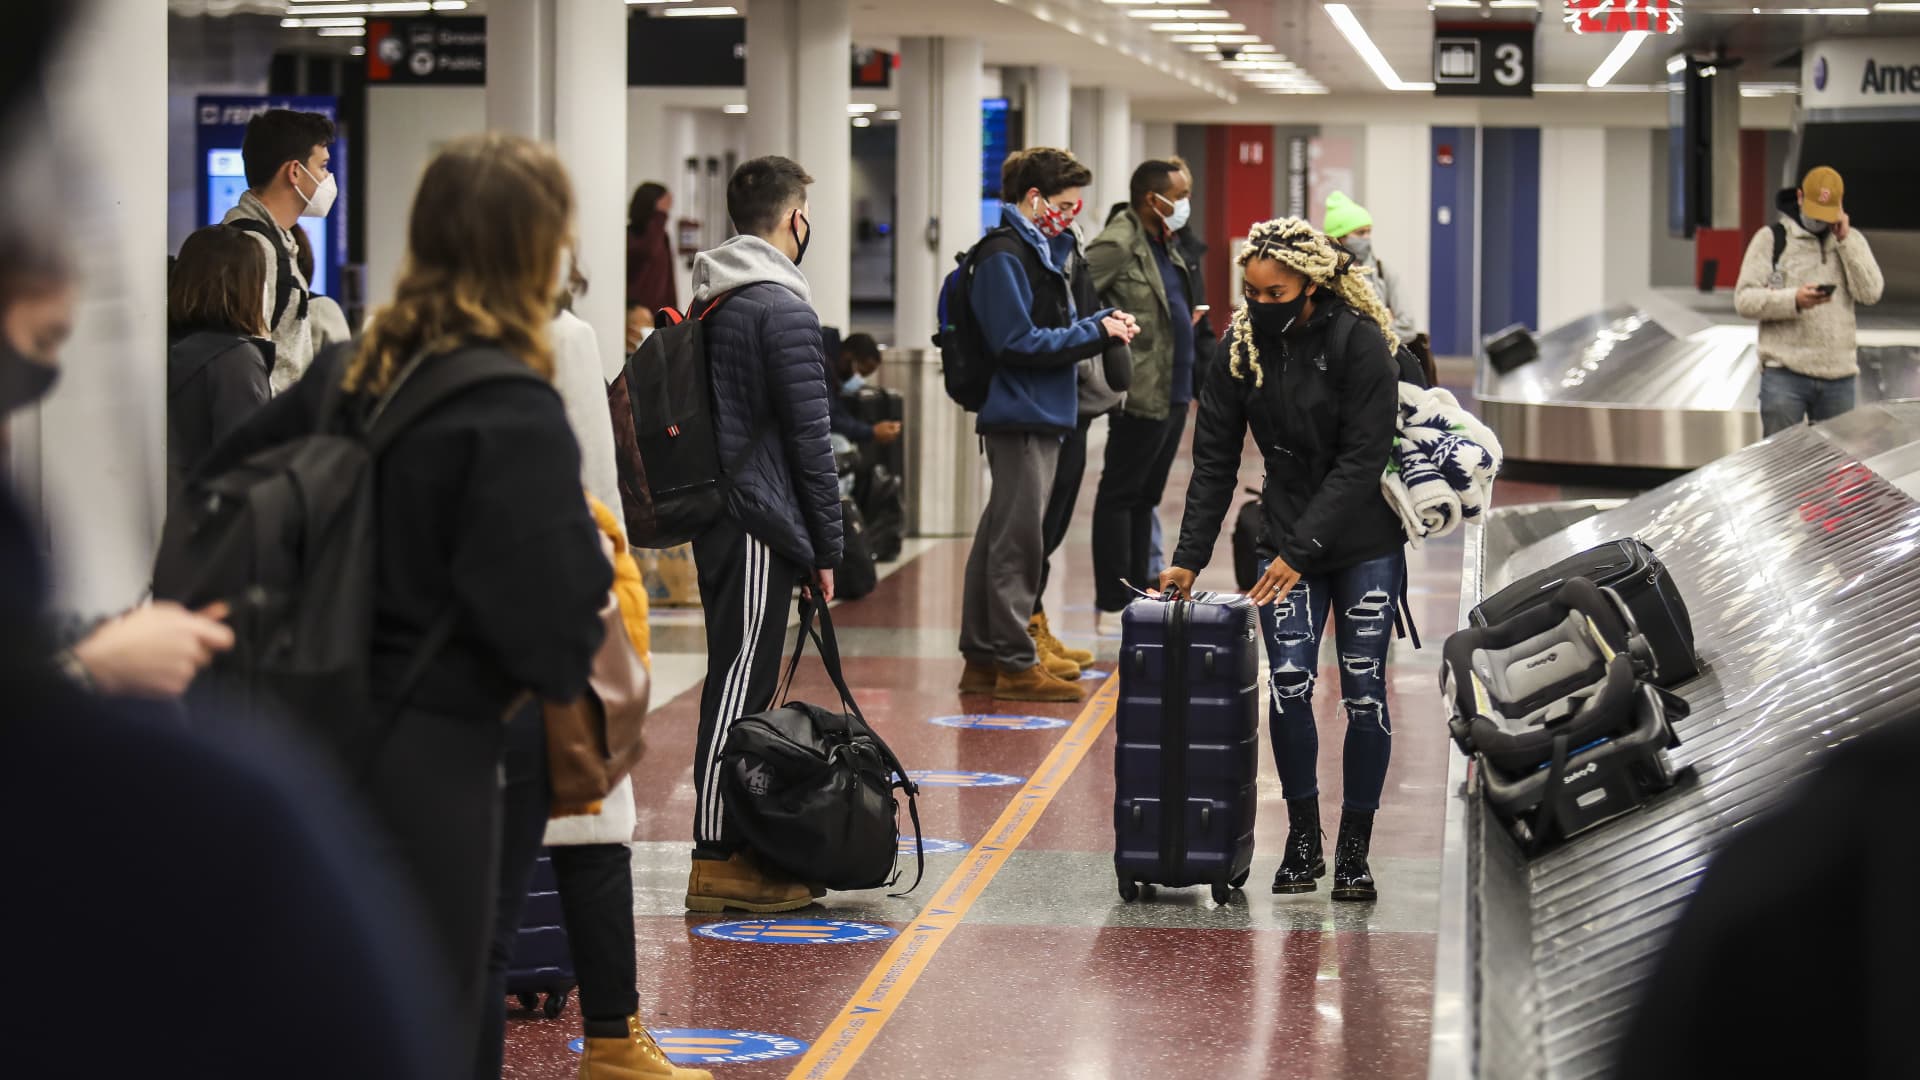 People wait for their baggage in the terminal at Boston Logan International Airport in Boston on Nov. 25, 2020.